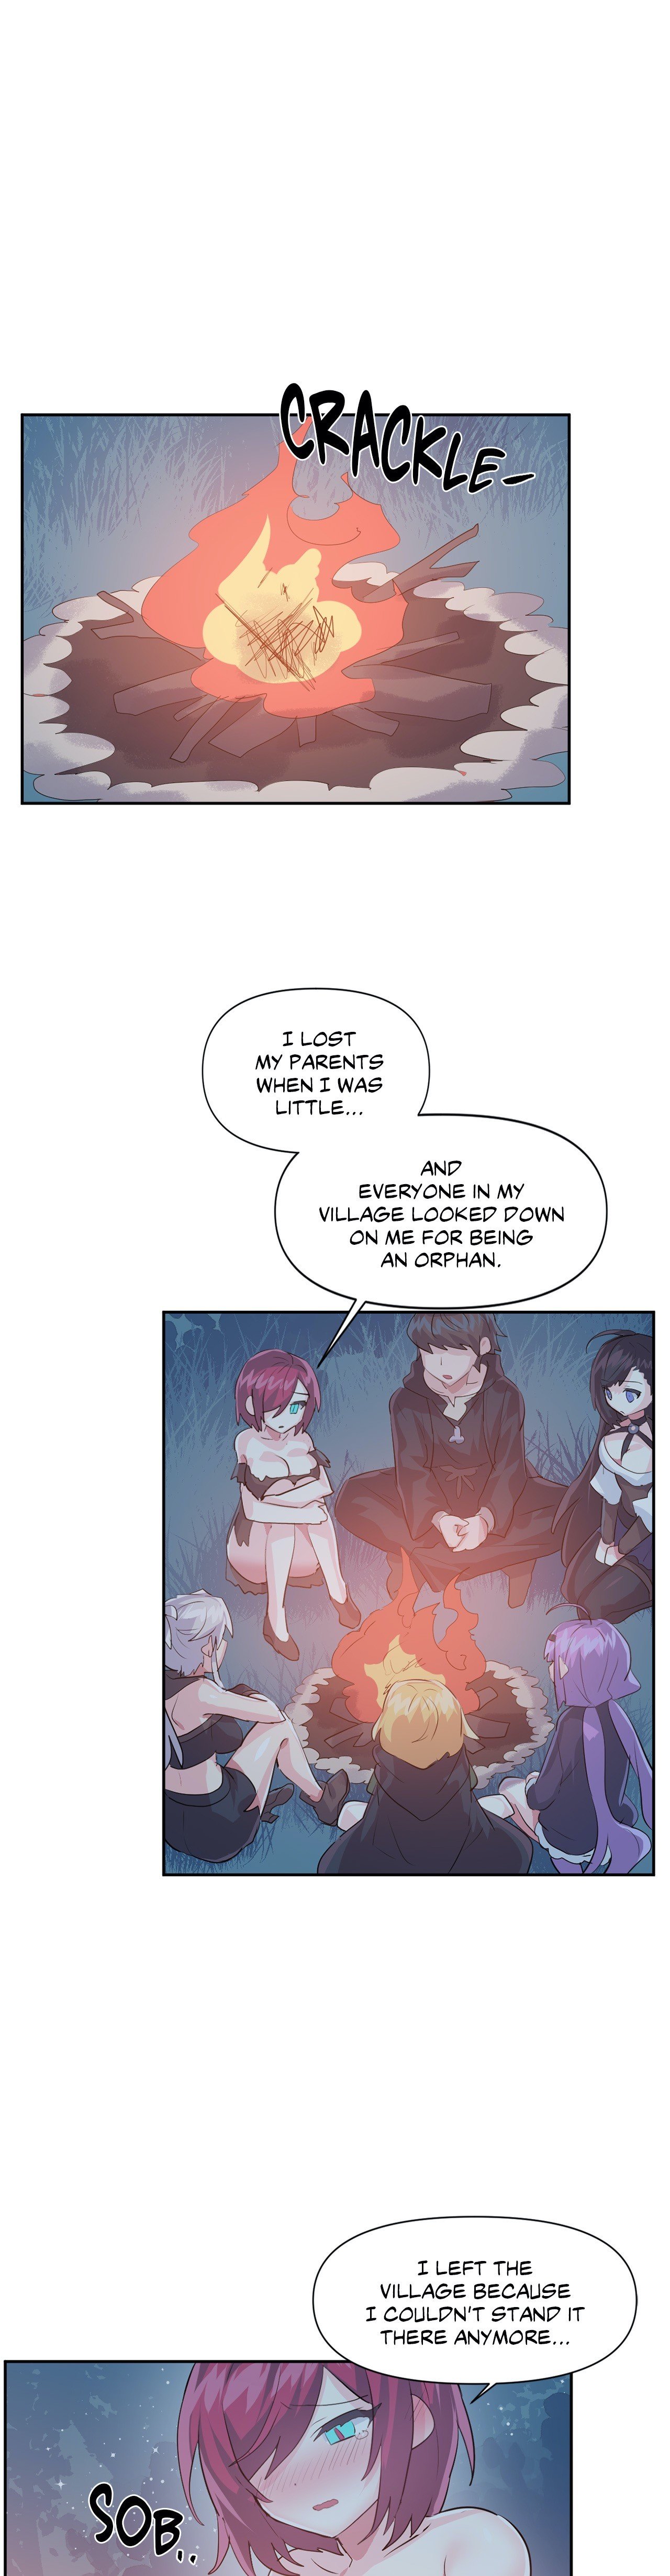 log-in-to-lust-a-land-chap-37-2